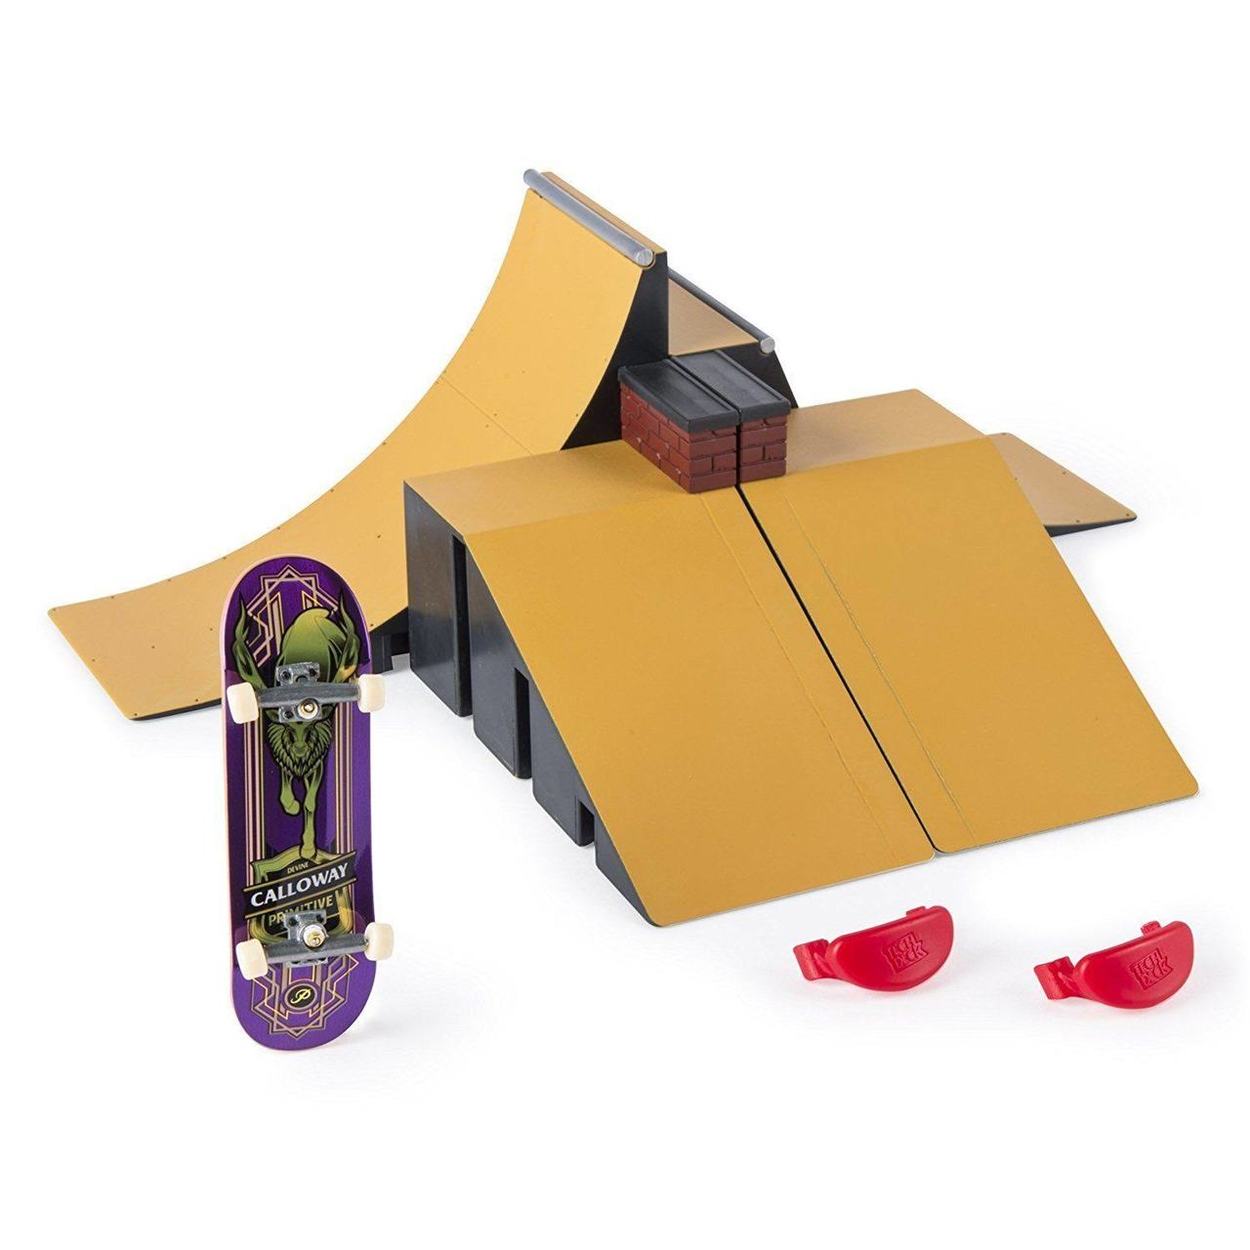 TECH DECK Starter Kit, Customizable Ramp Set with Exclusive Pro Fingerboard  and Trainer Clips, Kids Toys for Boys and Girls Ages 6 and up